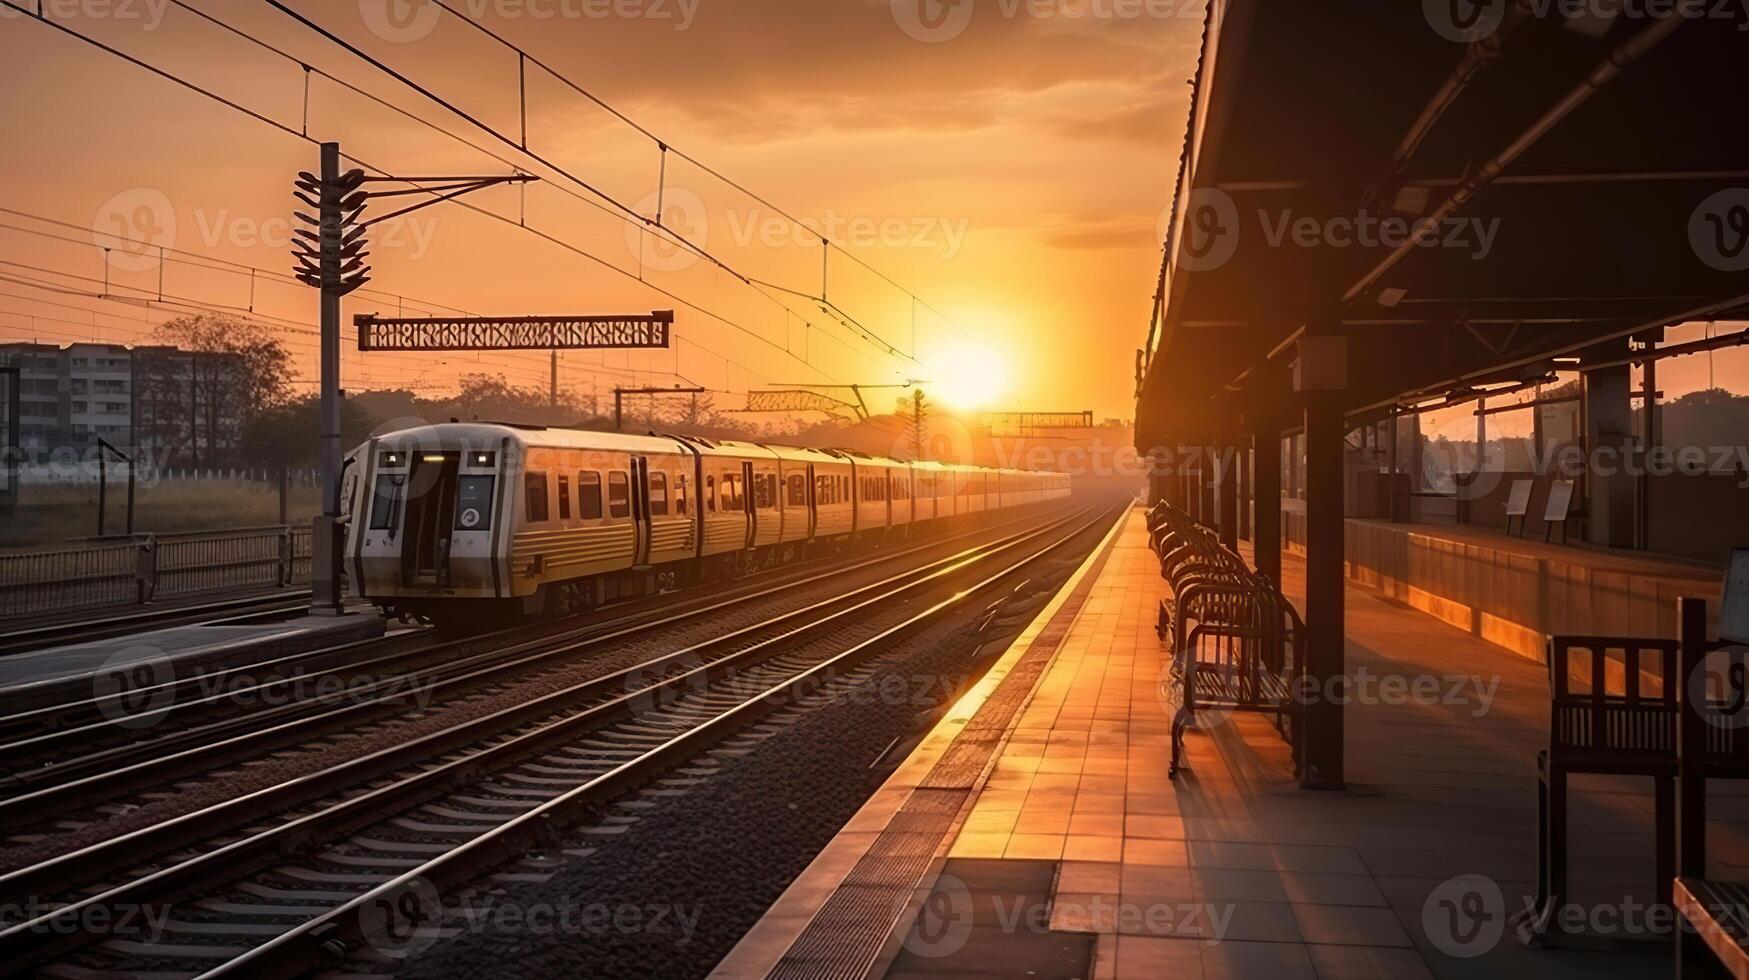 Train stop at railway station with sunset, photo